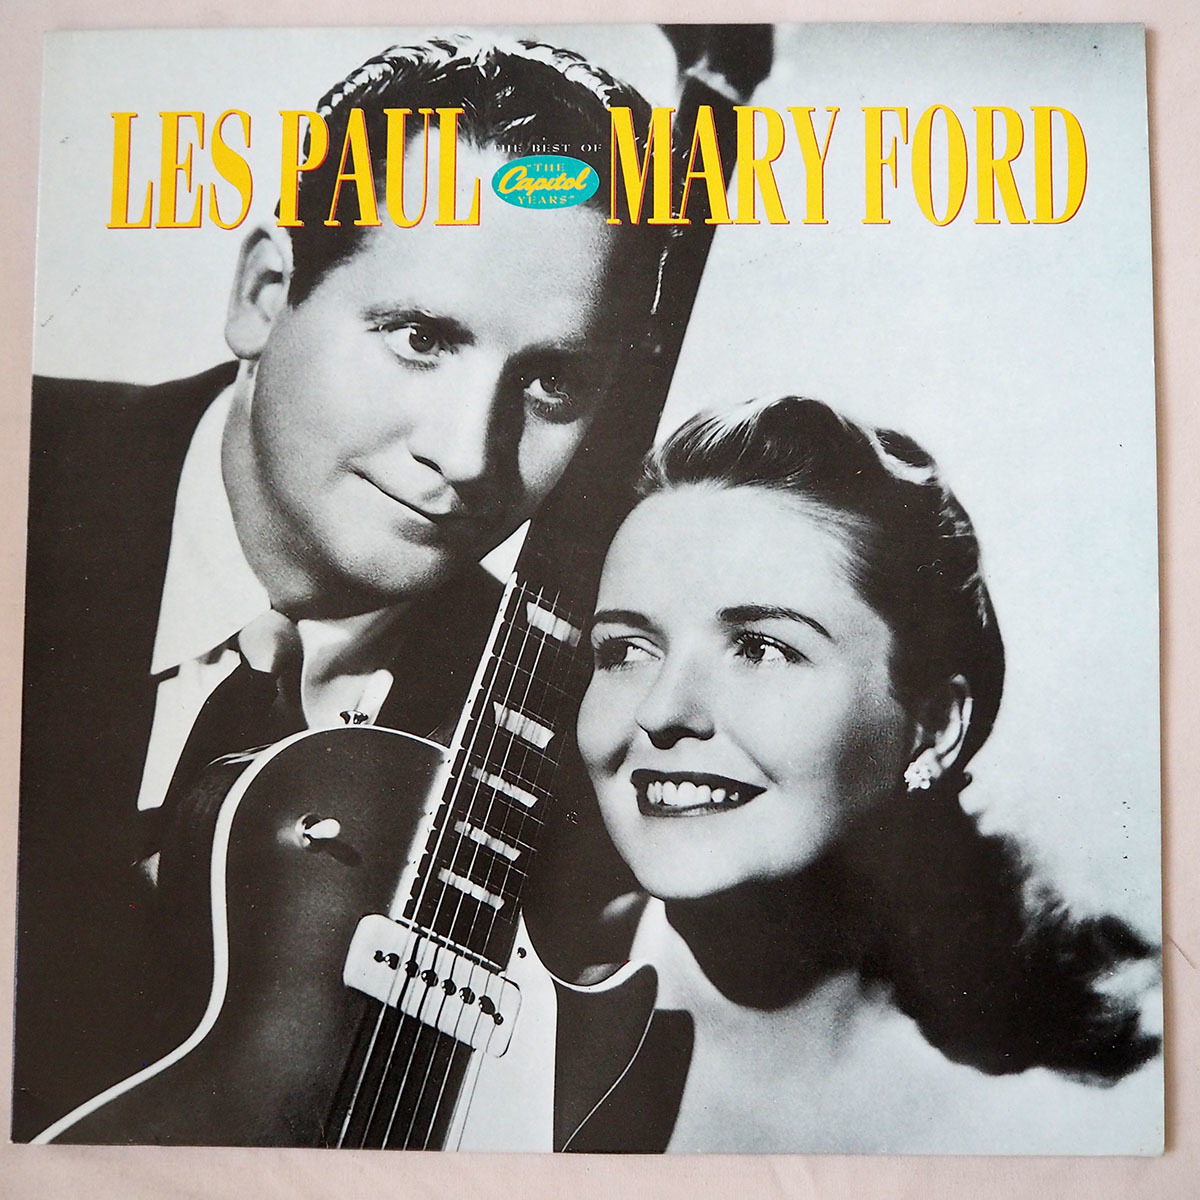 ◆ Les Paul & Mary Ford レス・ポール&メリー・フォード / The Capitol Years (Best Of) ベスト盤 送料無料 ◆_画像1